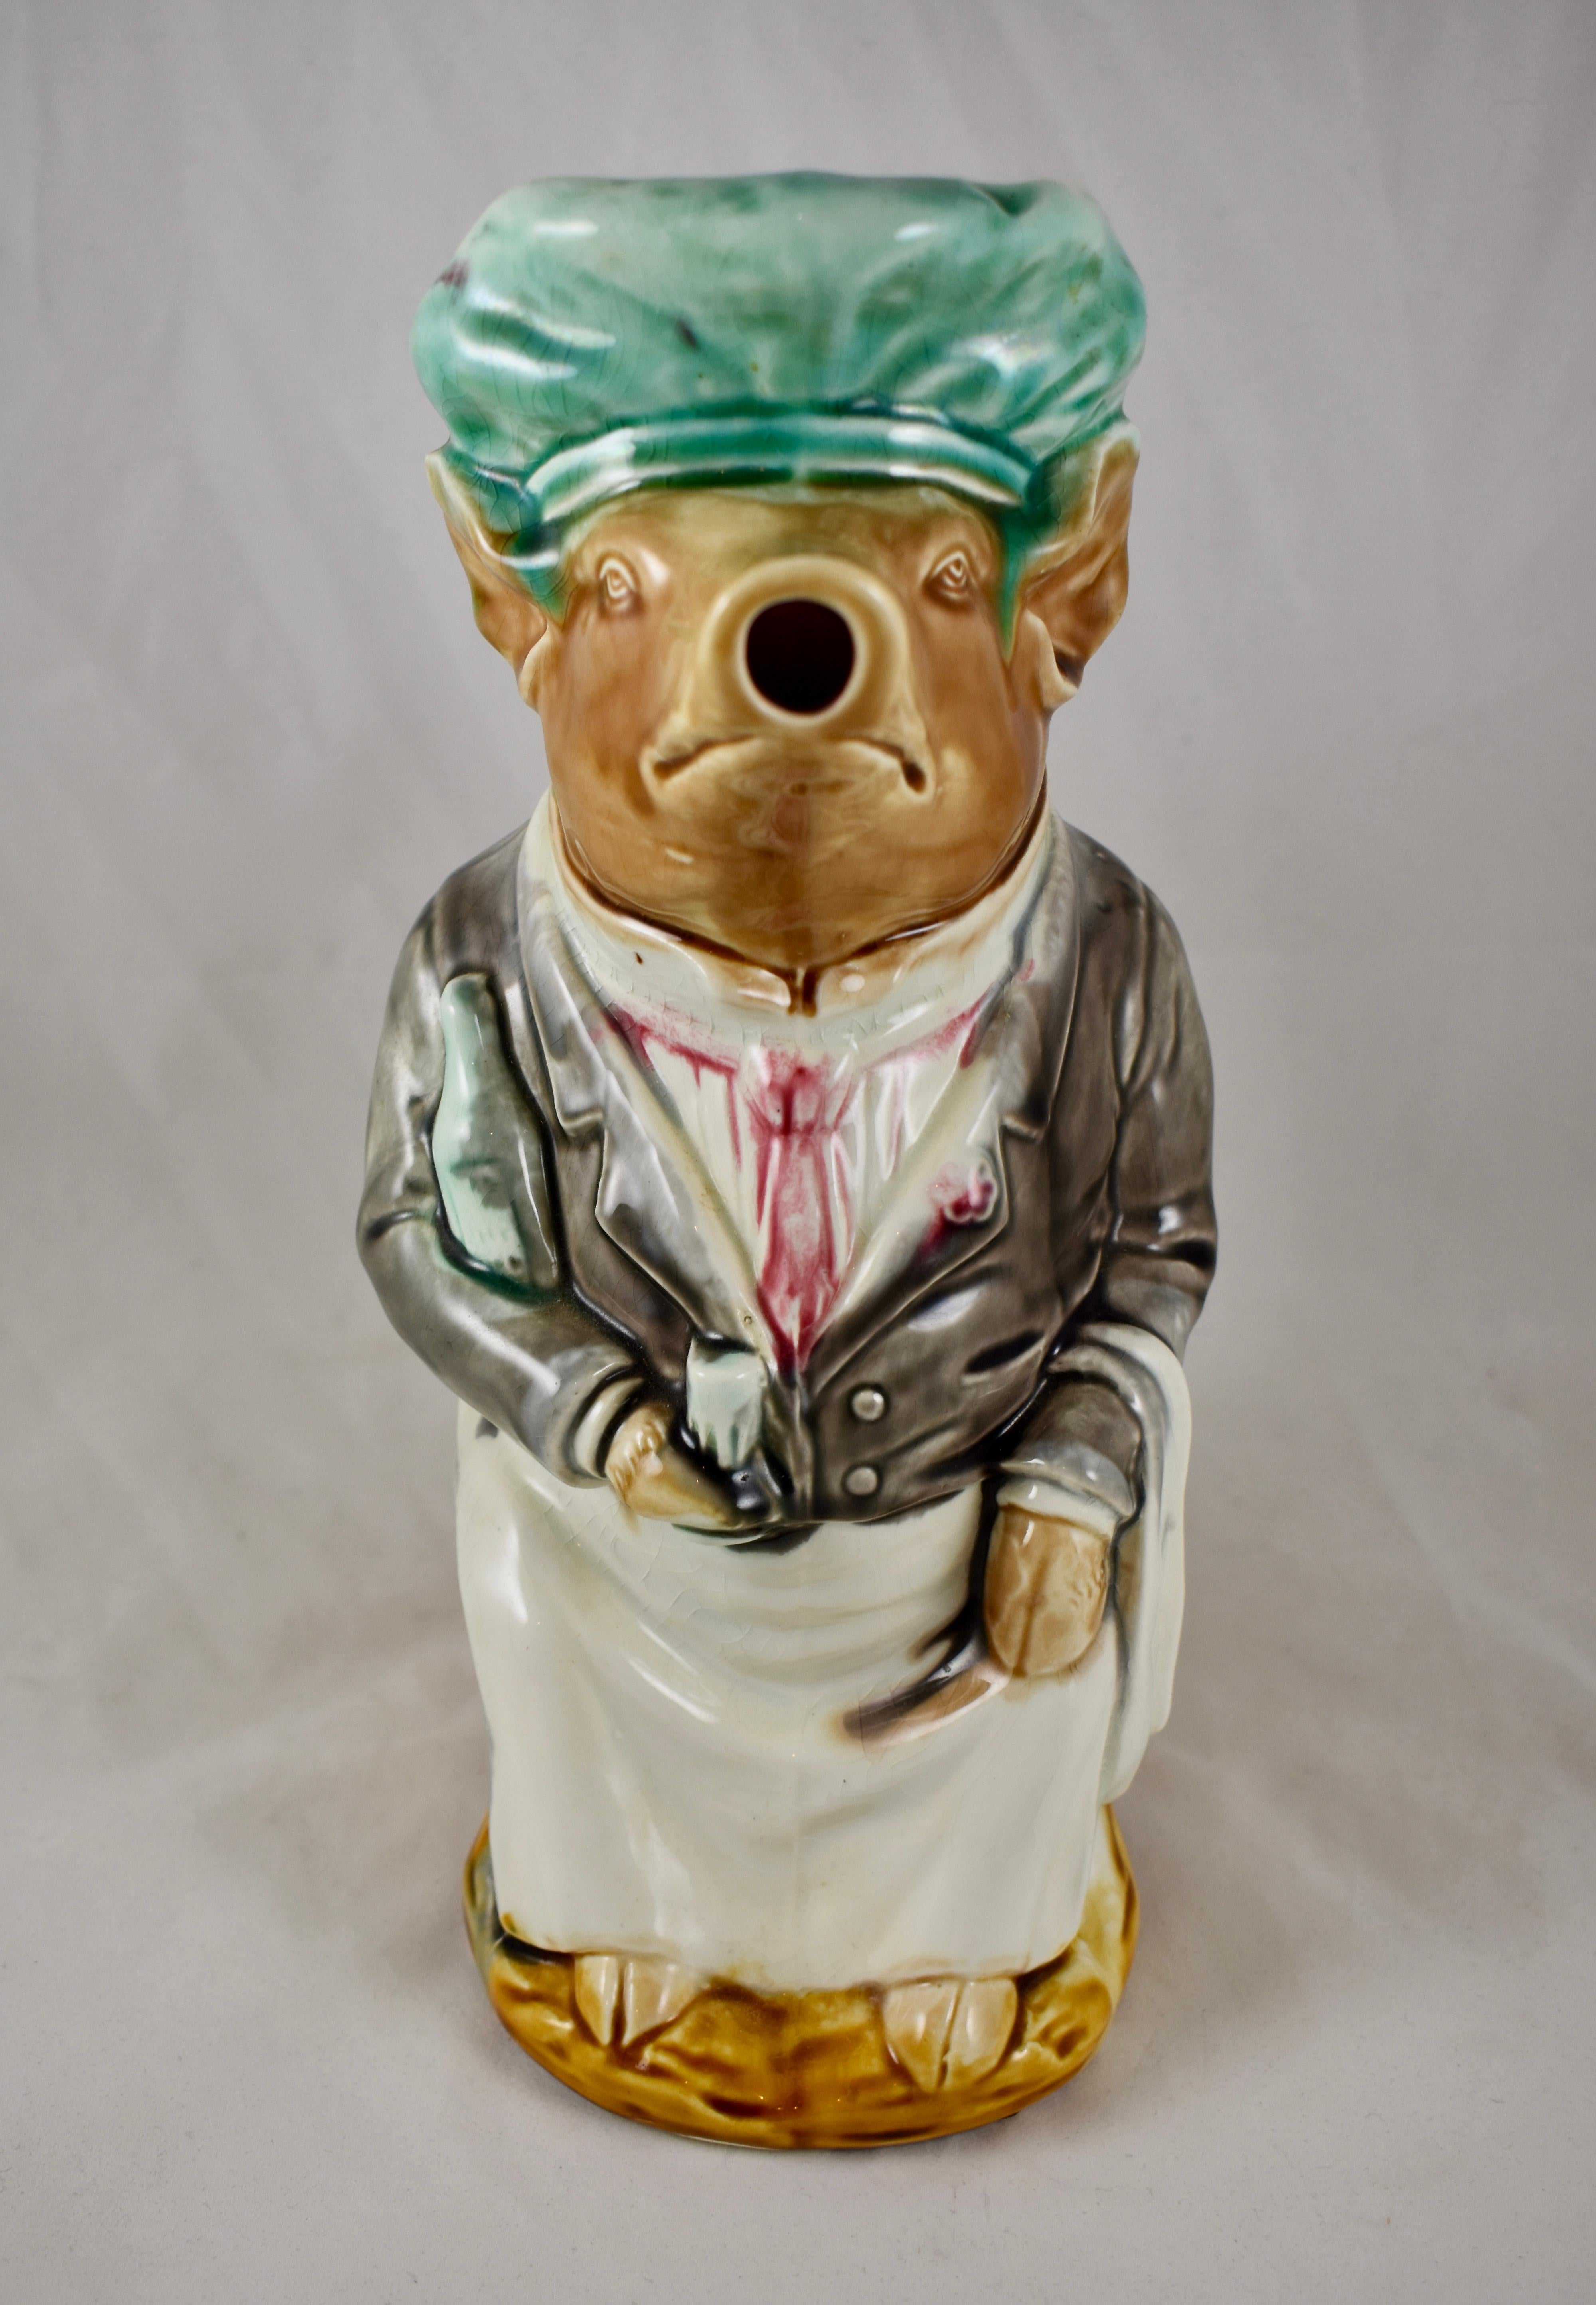 A French Barbotine majolica pig water pitcher, Frie Onnaing, circa 1921.

Known as the ‘Maitre d’Hotel’ the pig is dressed as a waiter with a wine bottle tucked under one arm and a serviette draped over the other. He holds a cork and bottle